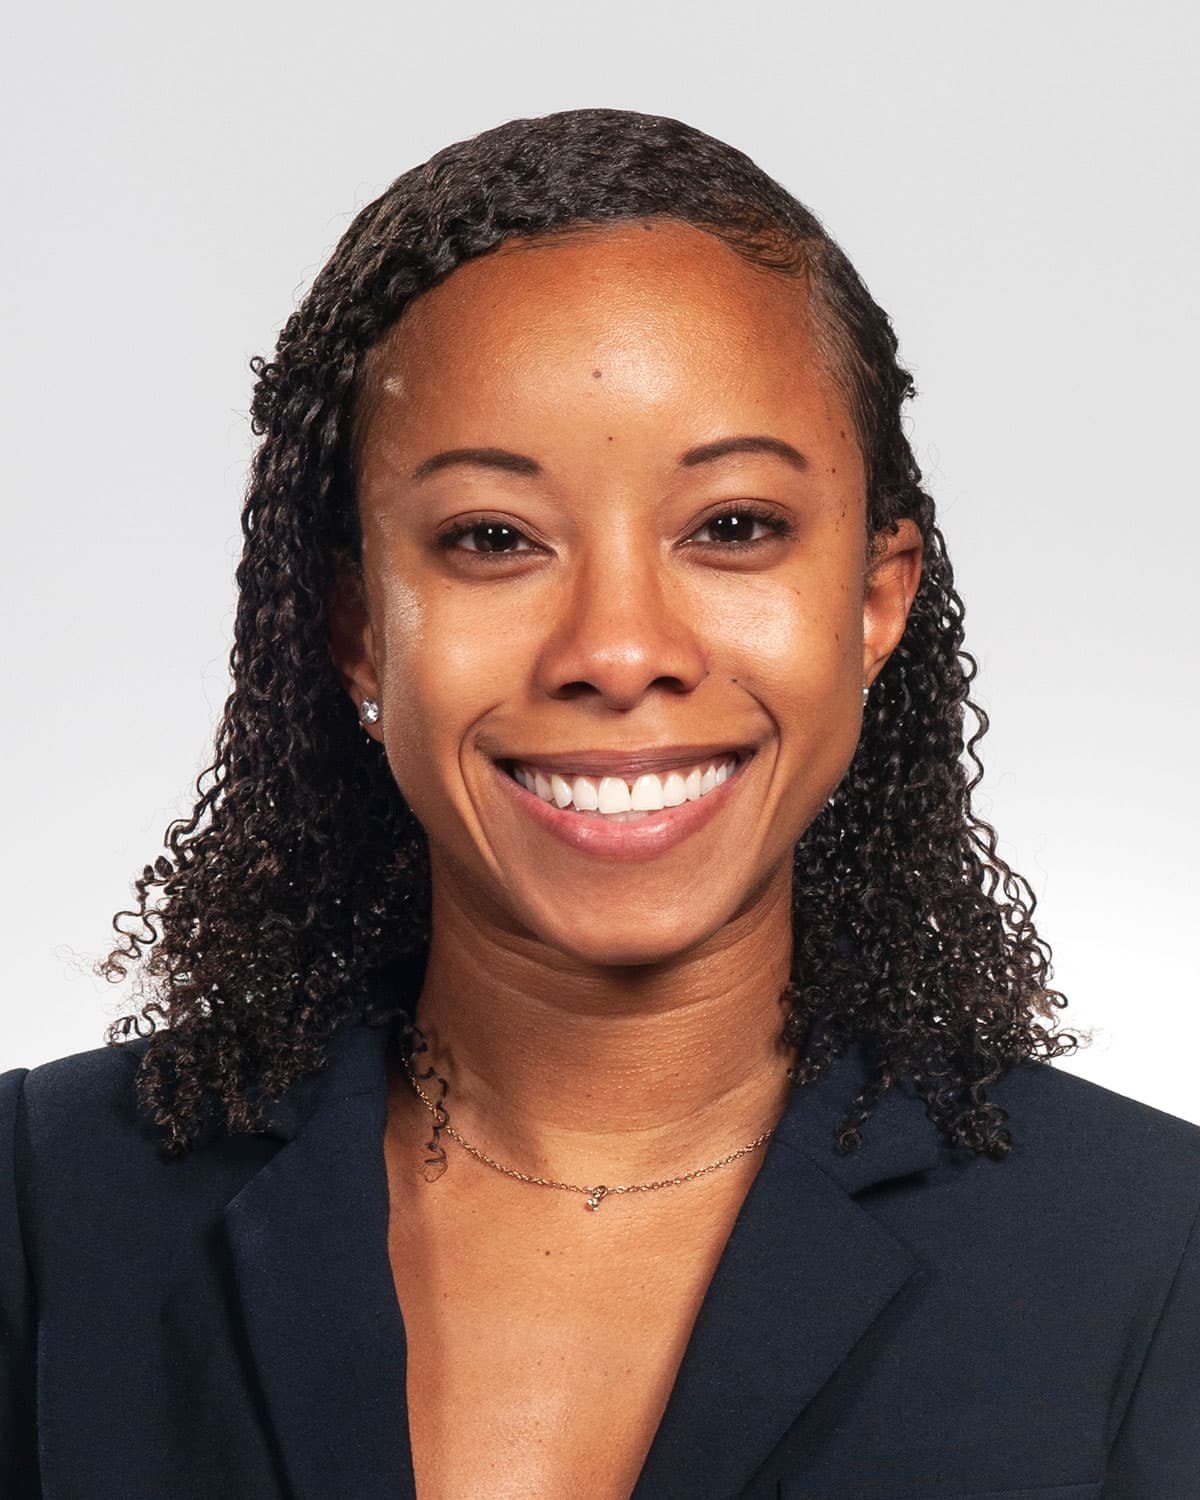 In March 2021, PCOM's Arielle Roberts (DO '21) matched at Maimonides Medical Center in Brooklyn